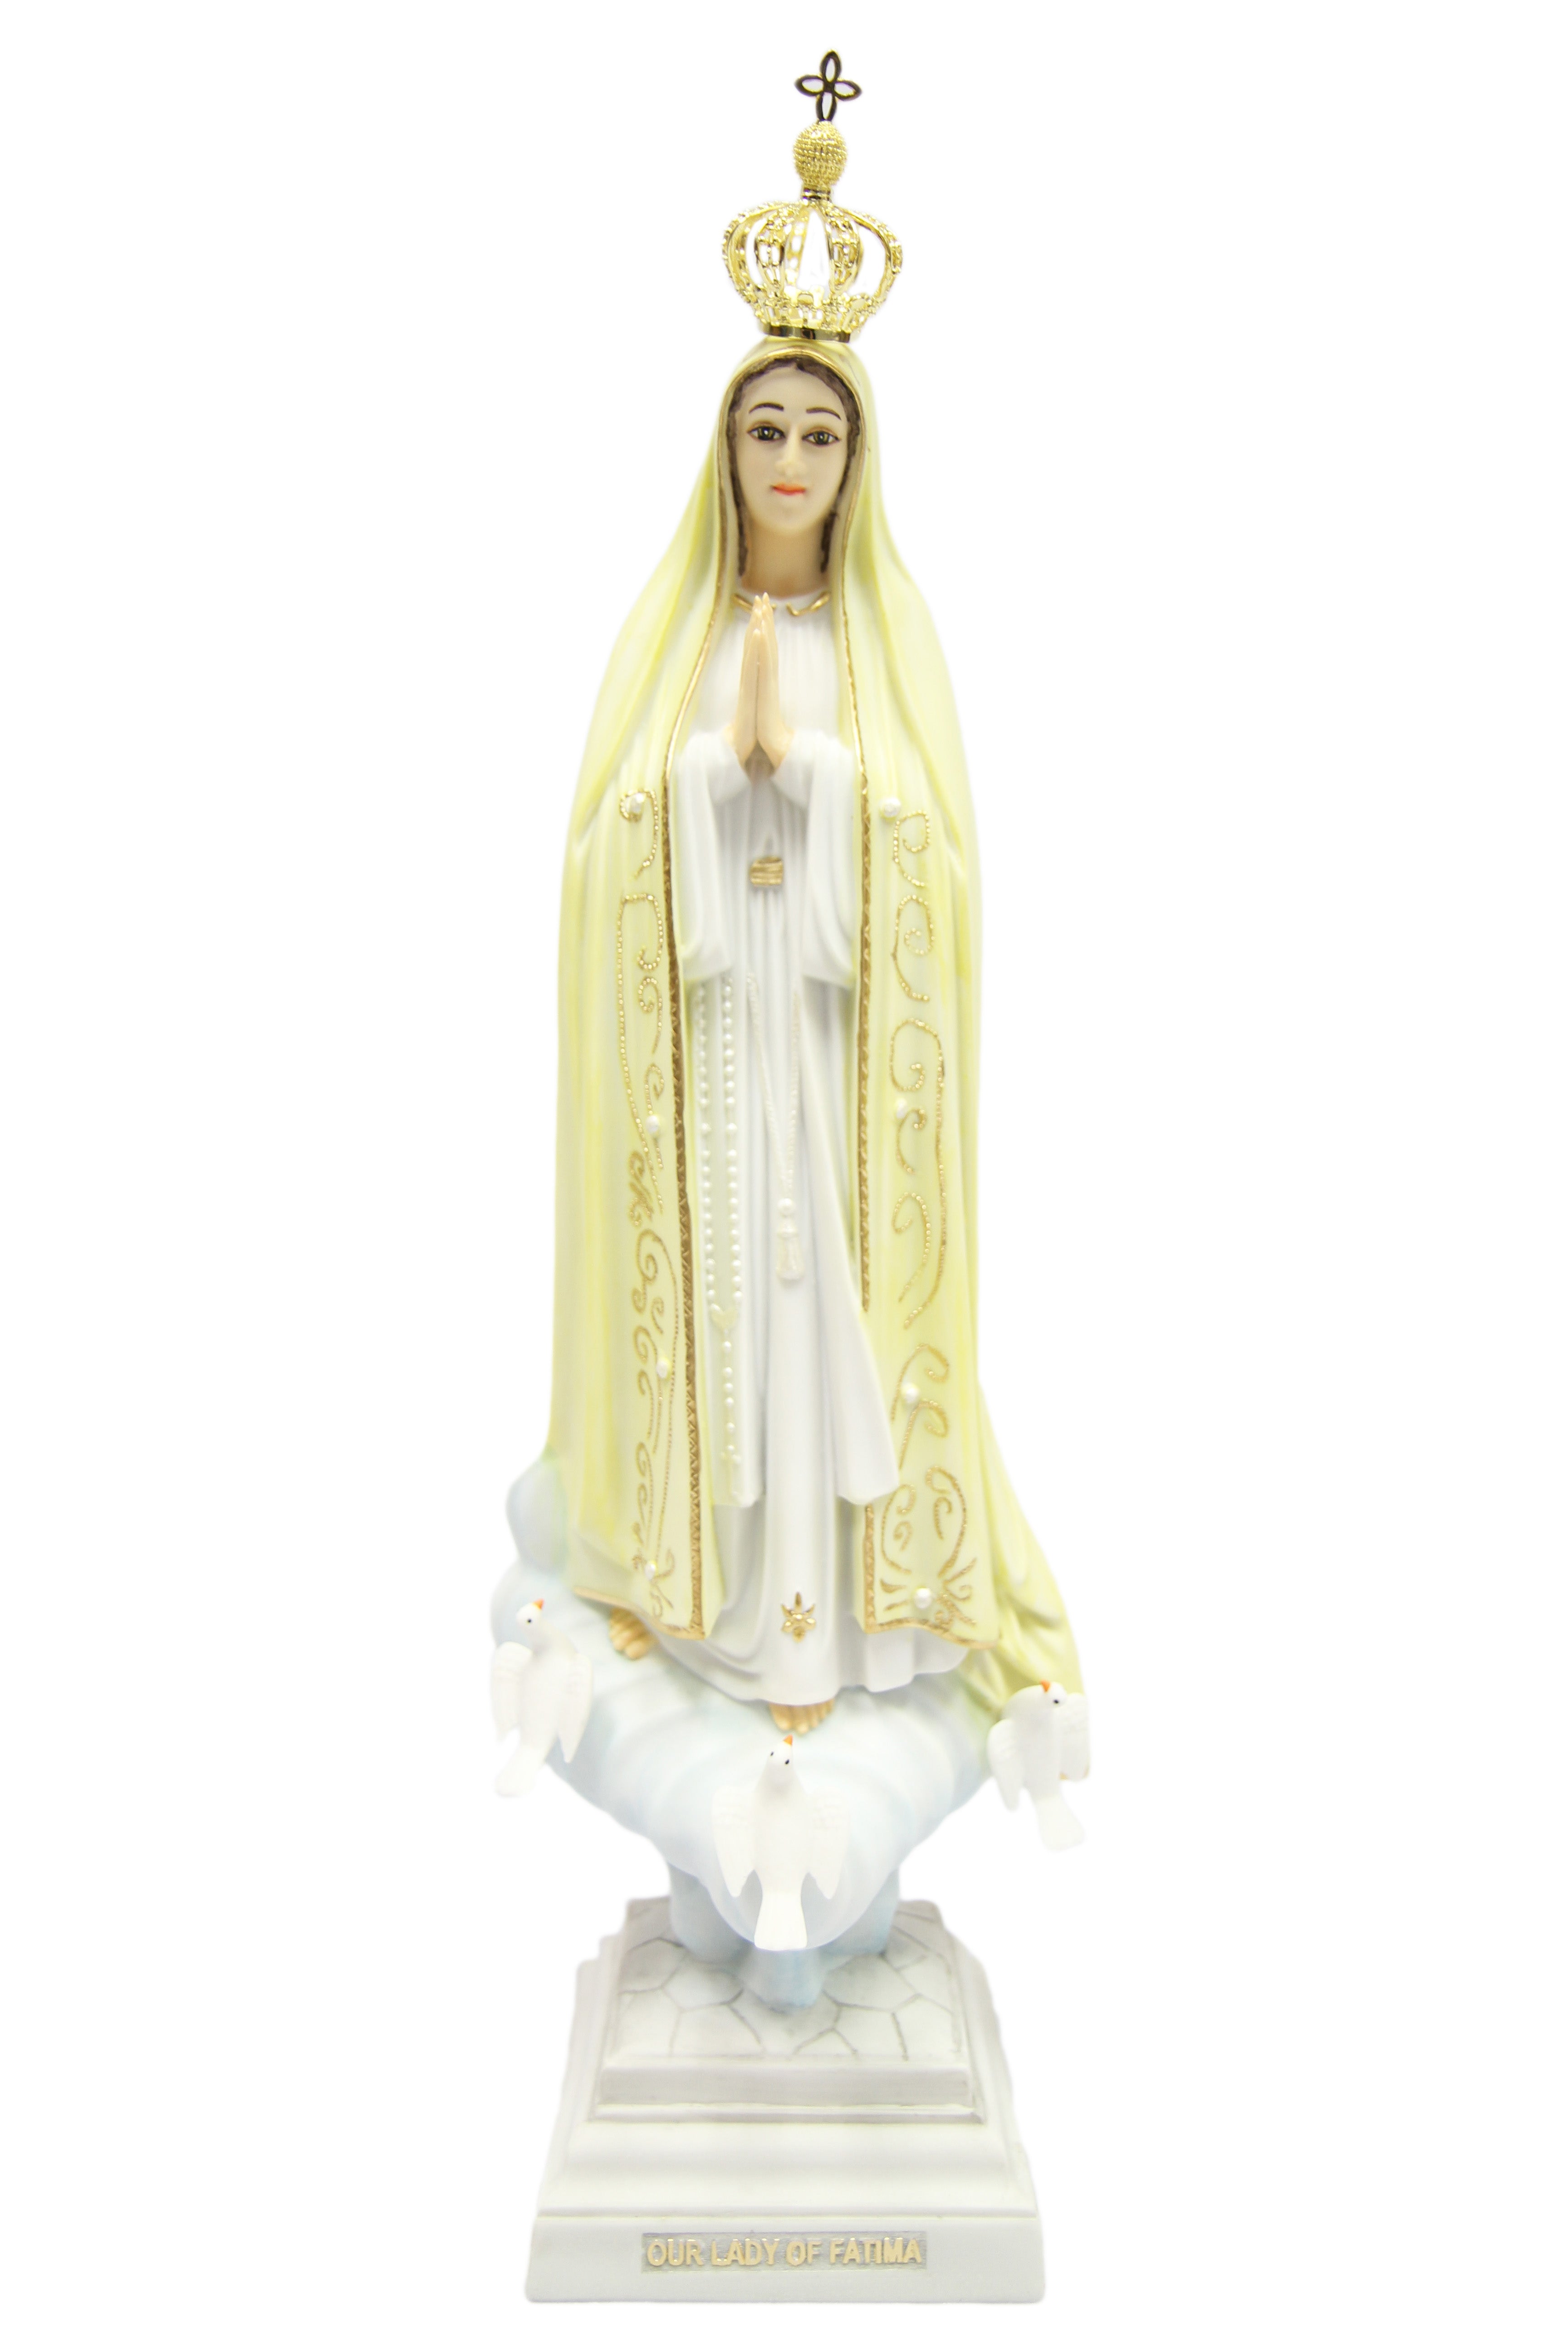 16.25 Inch Our Lady of Fatima Virgin Mary Catholic Statue Sculpture Religious Blessed Mother